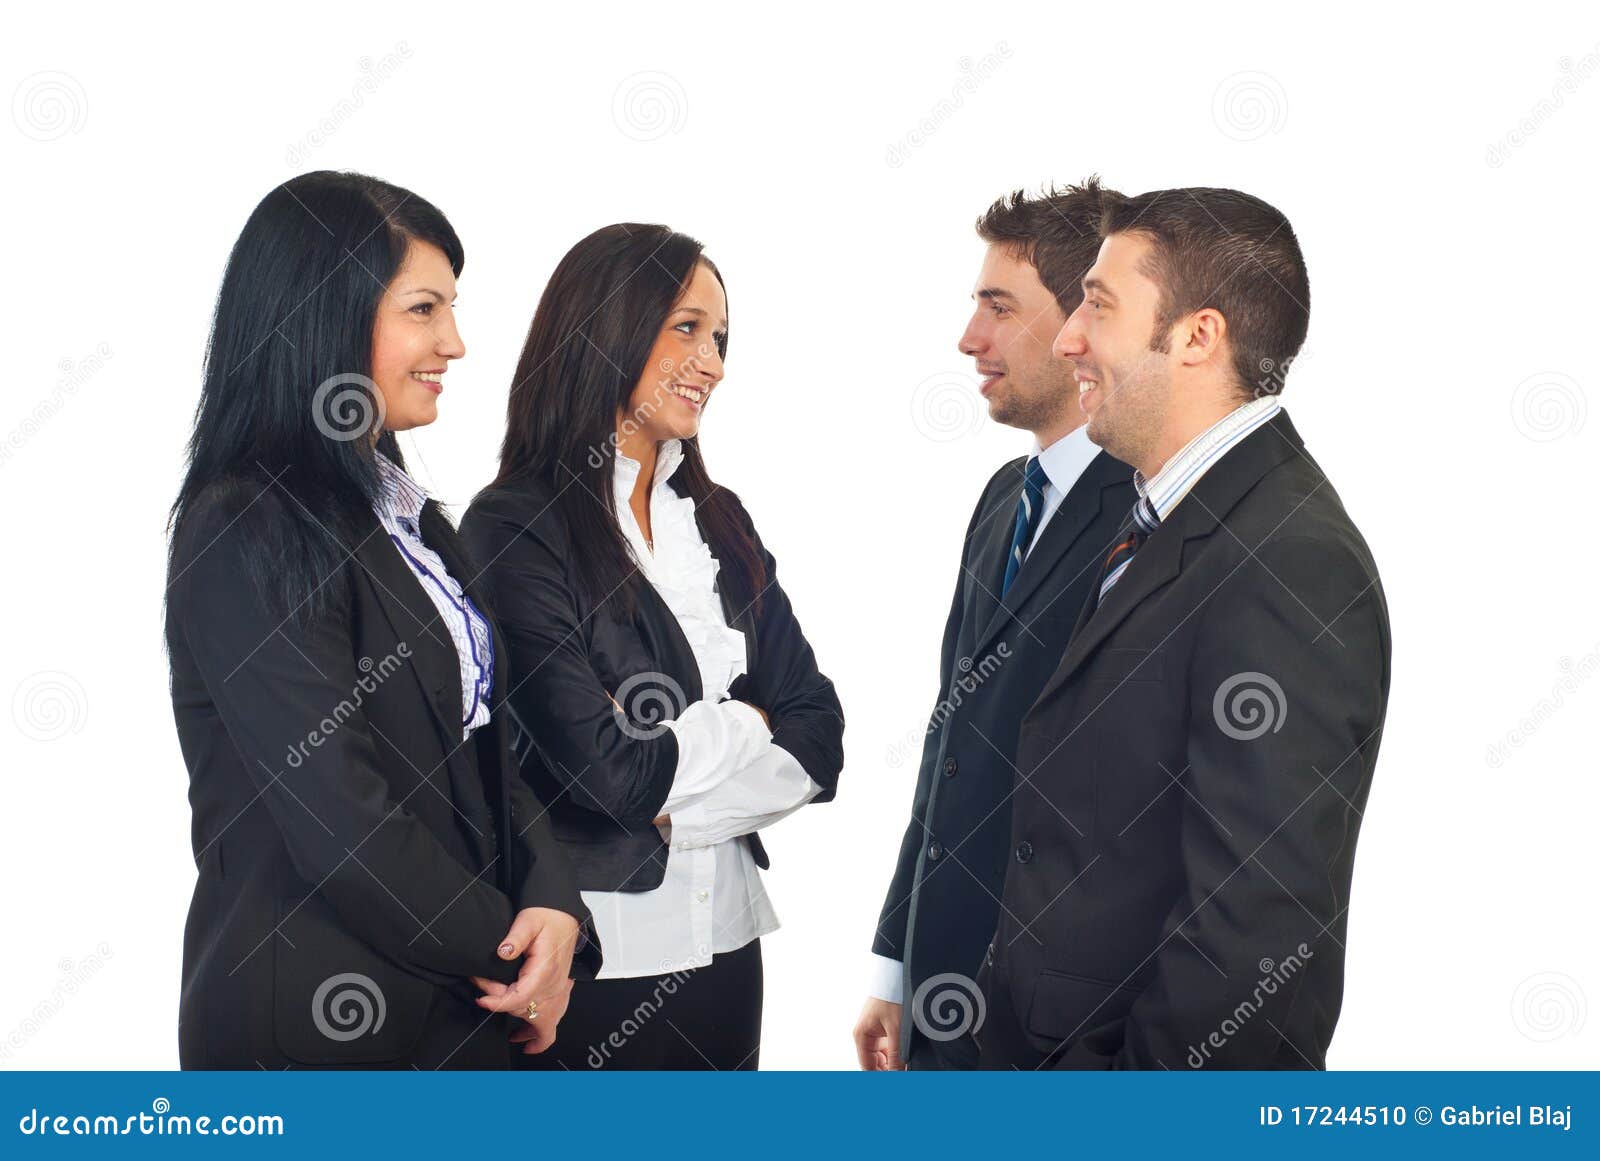 group of business people having conversation